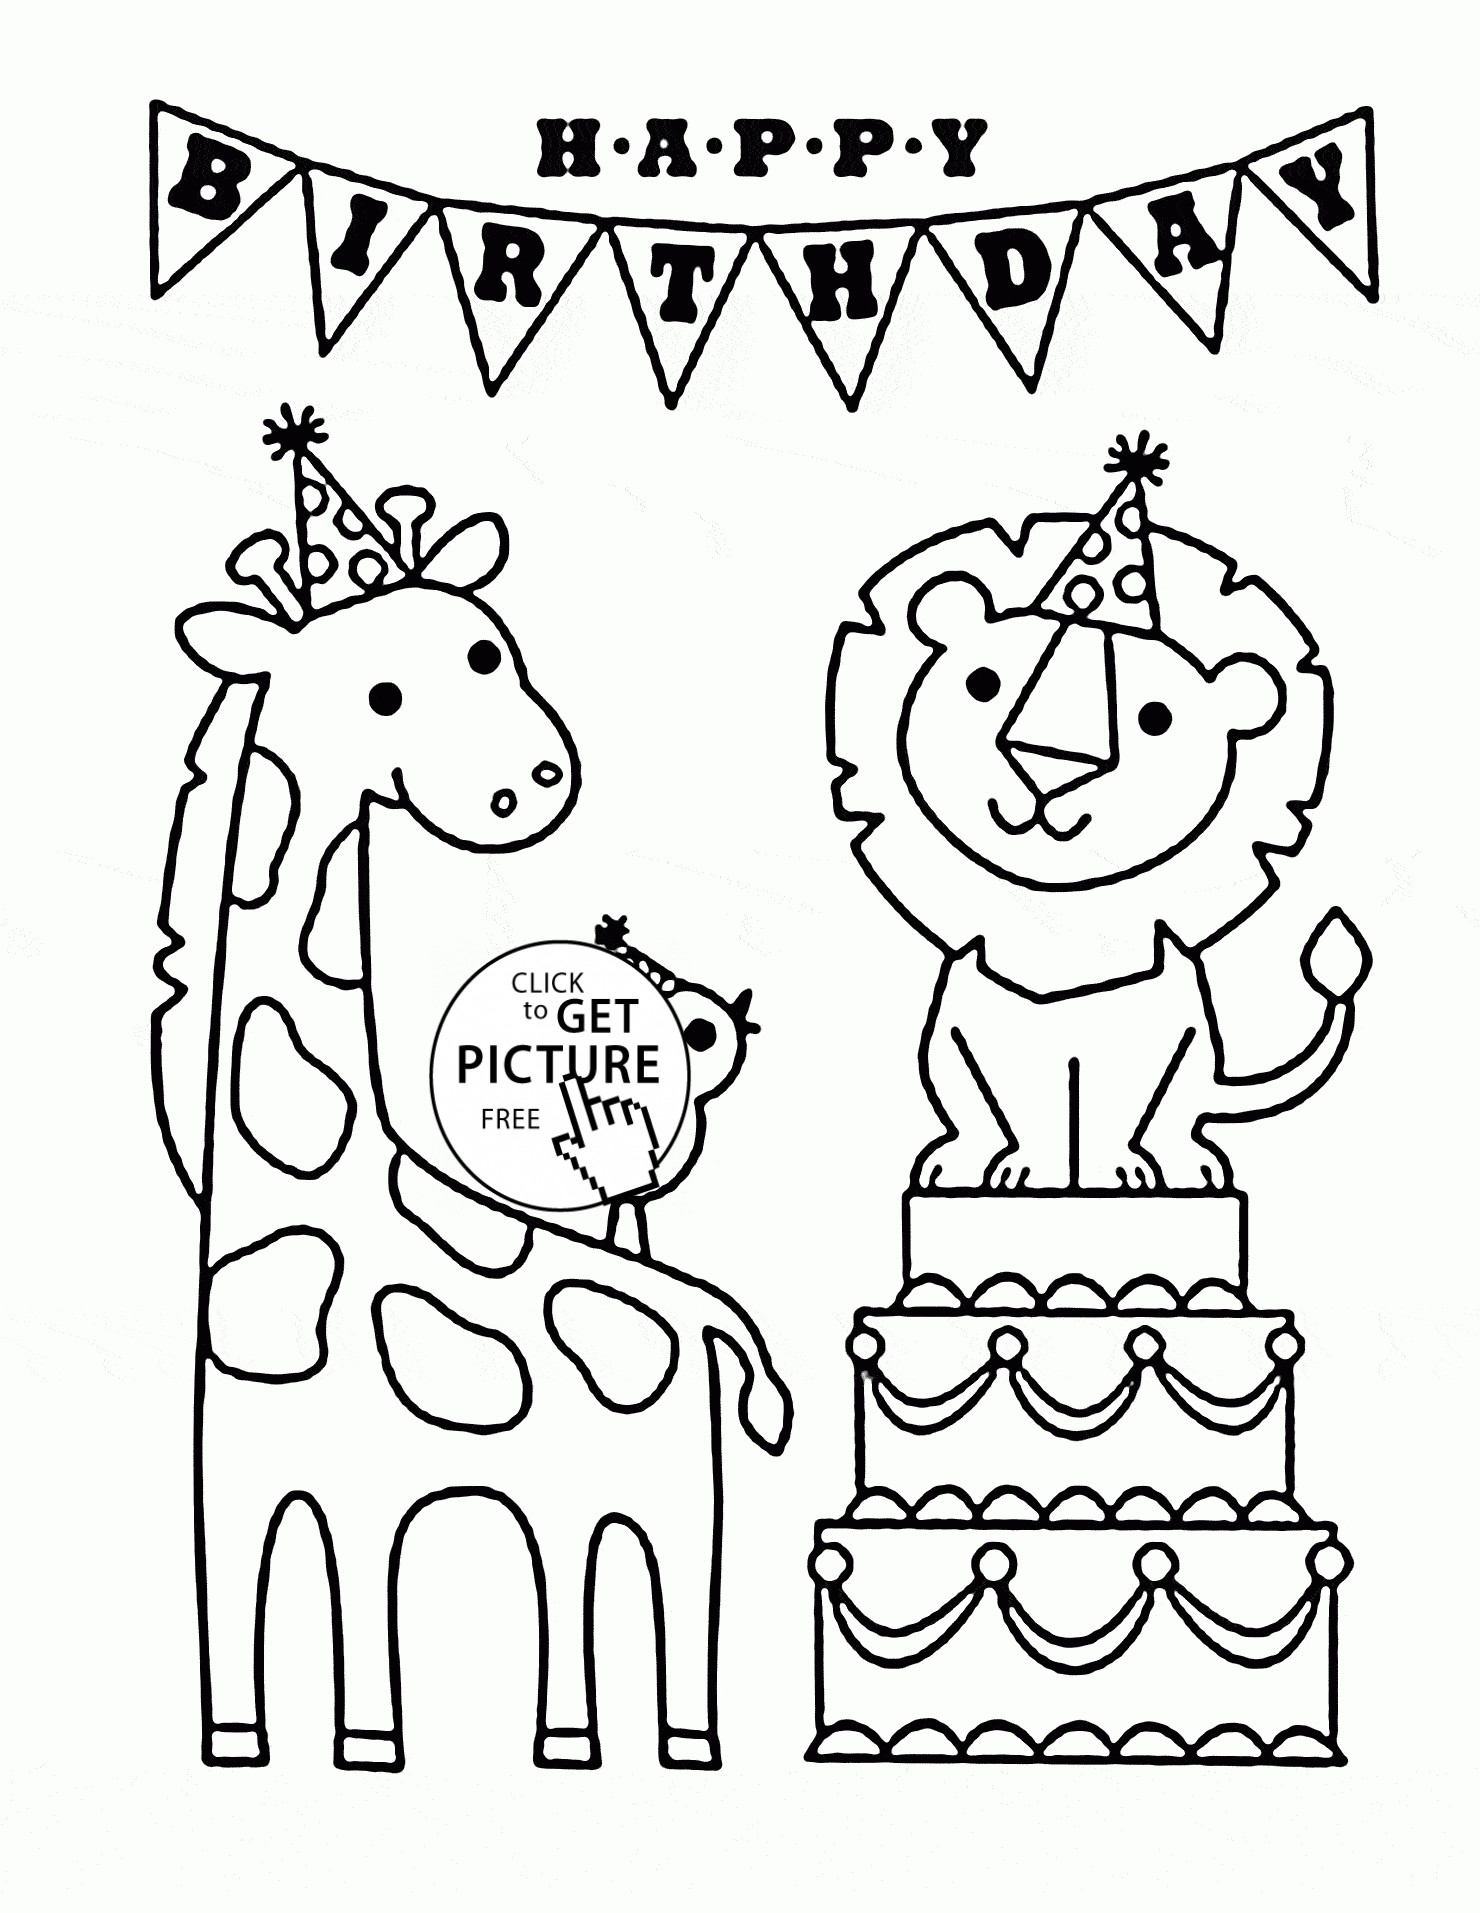 happy-birthday-nana-coloring-pages-at-getcolorings-free-printable-colorings-pages-to-print